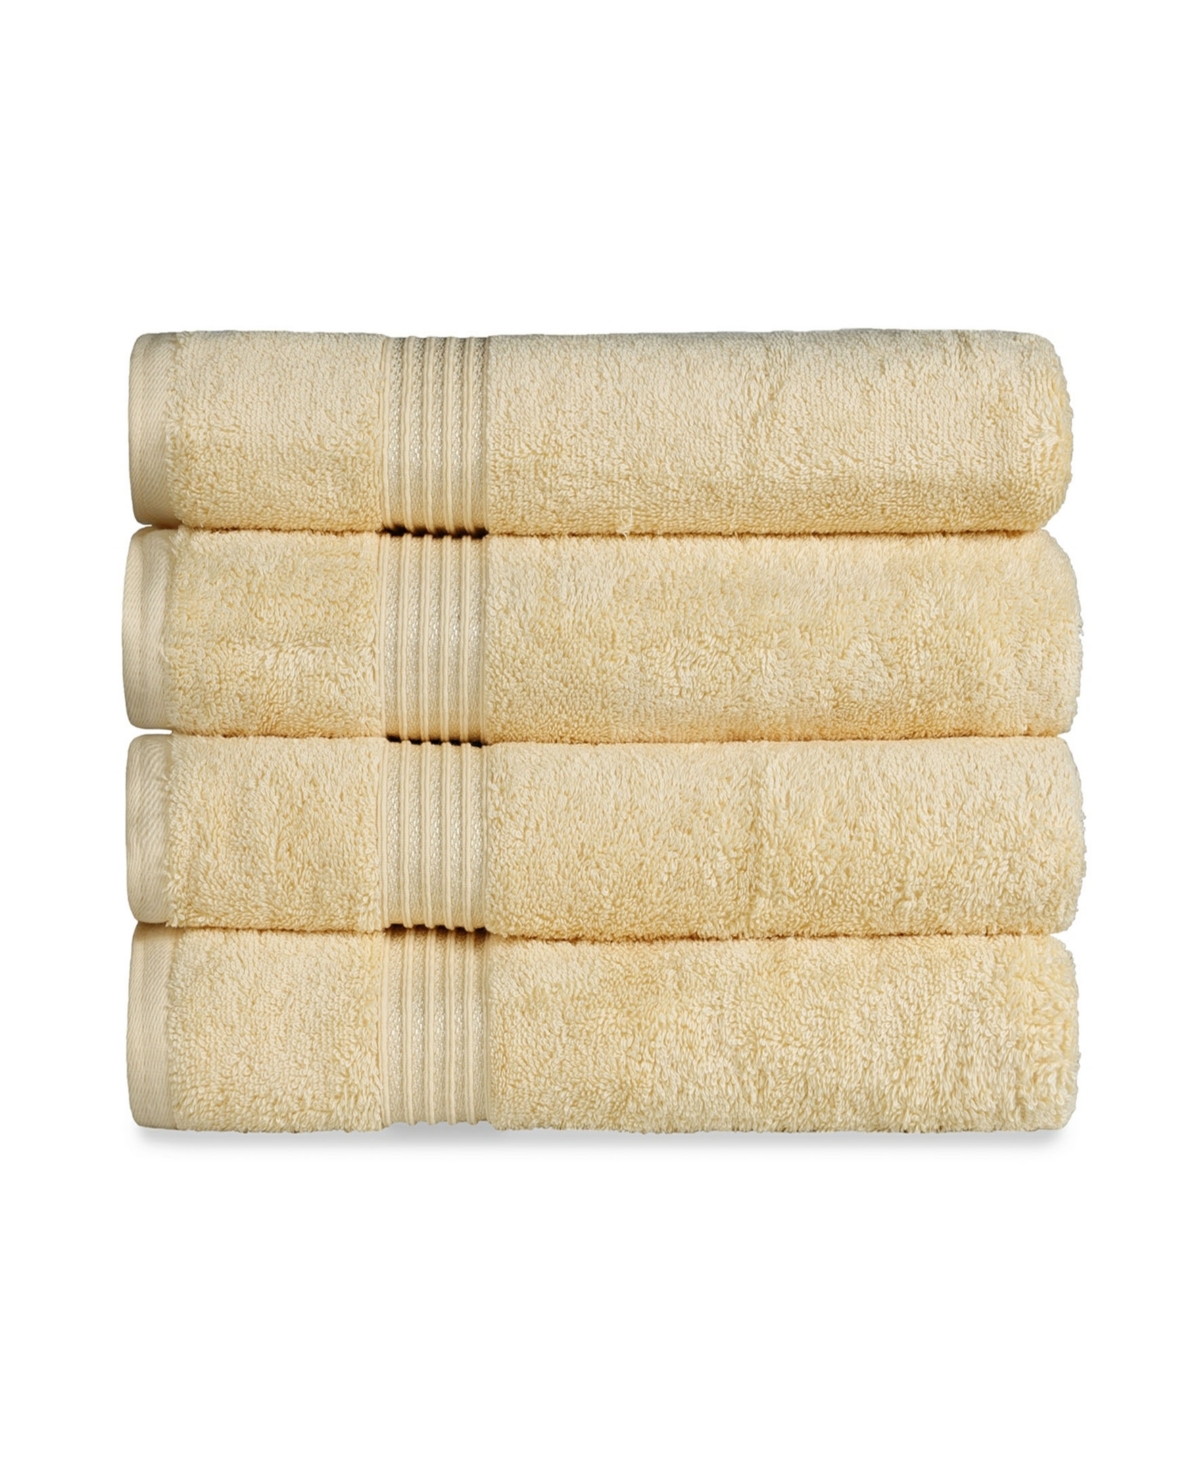 Superior Solid Quick Drying Absorbent 4 Piece Egyptian Cotton Bath Towel Set Bedding In Canary